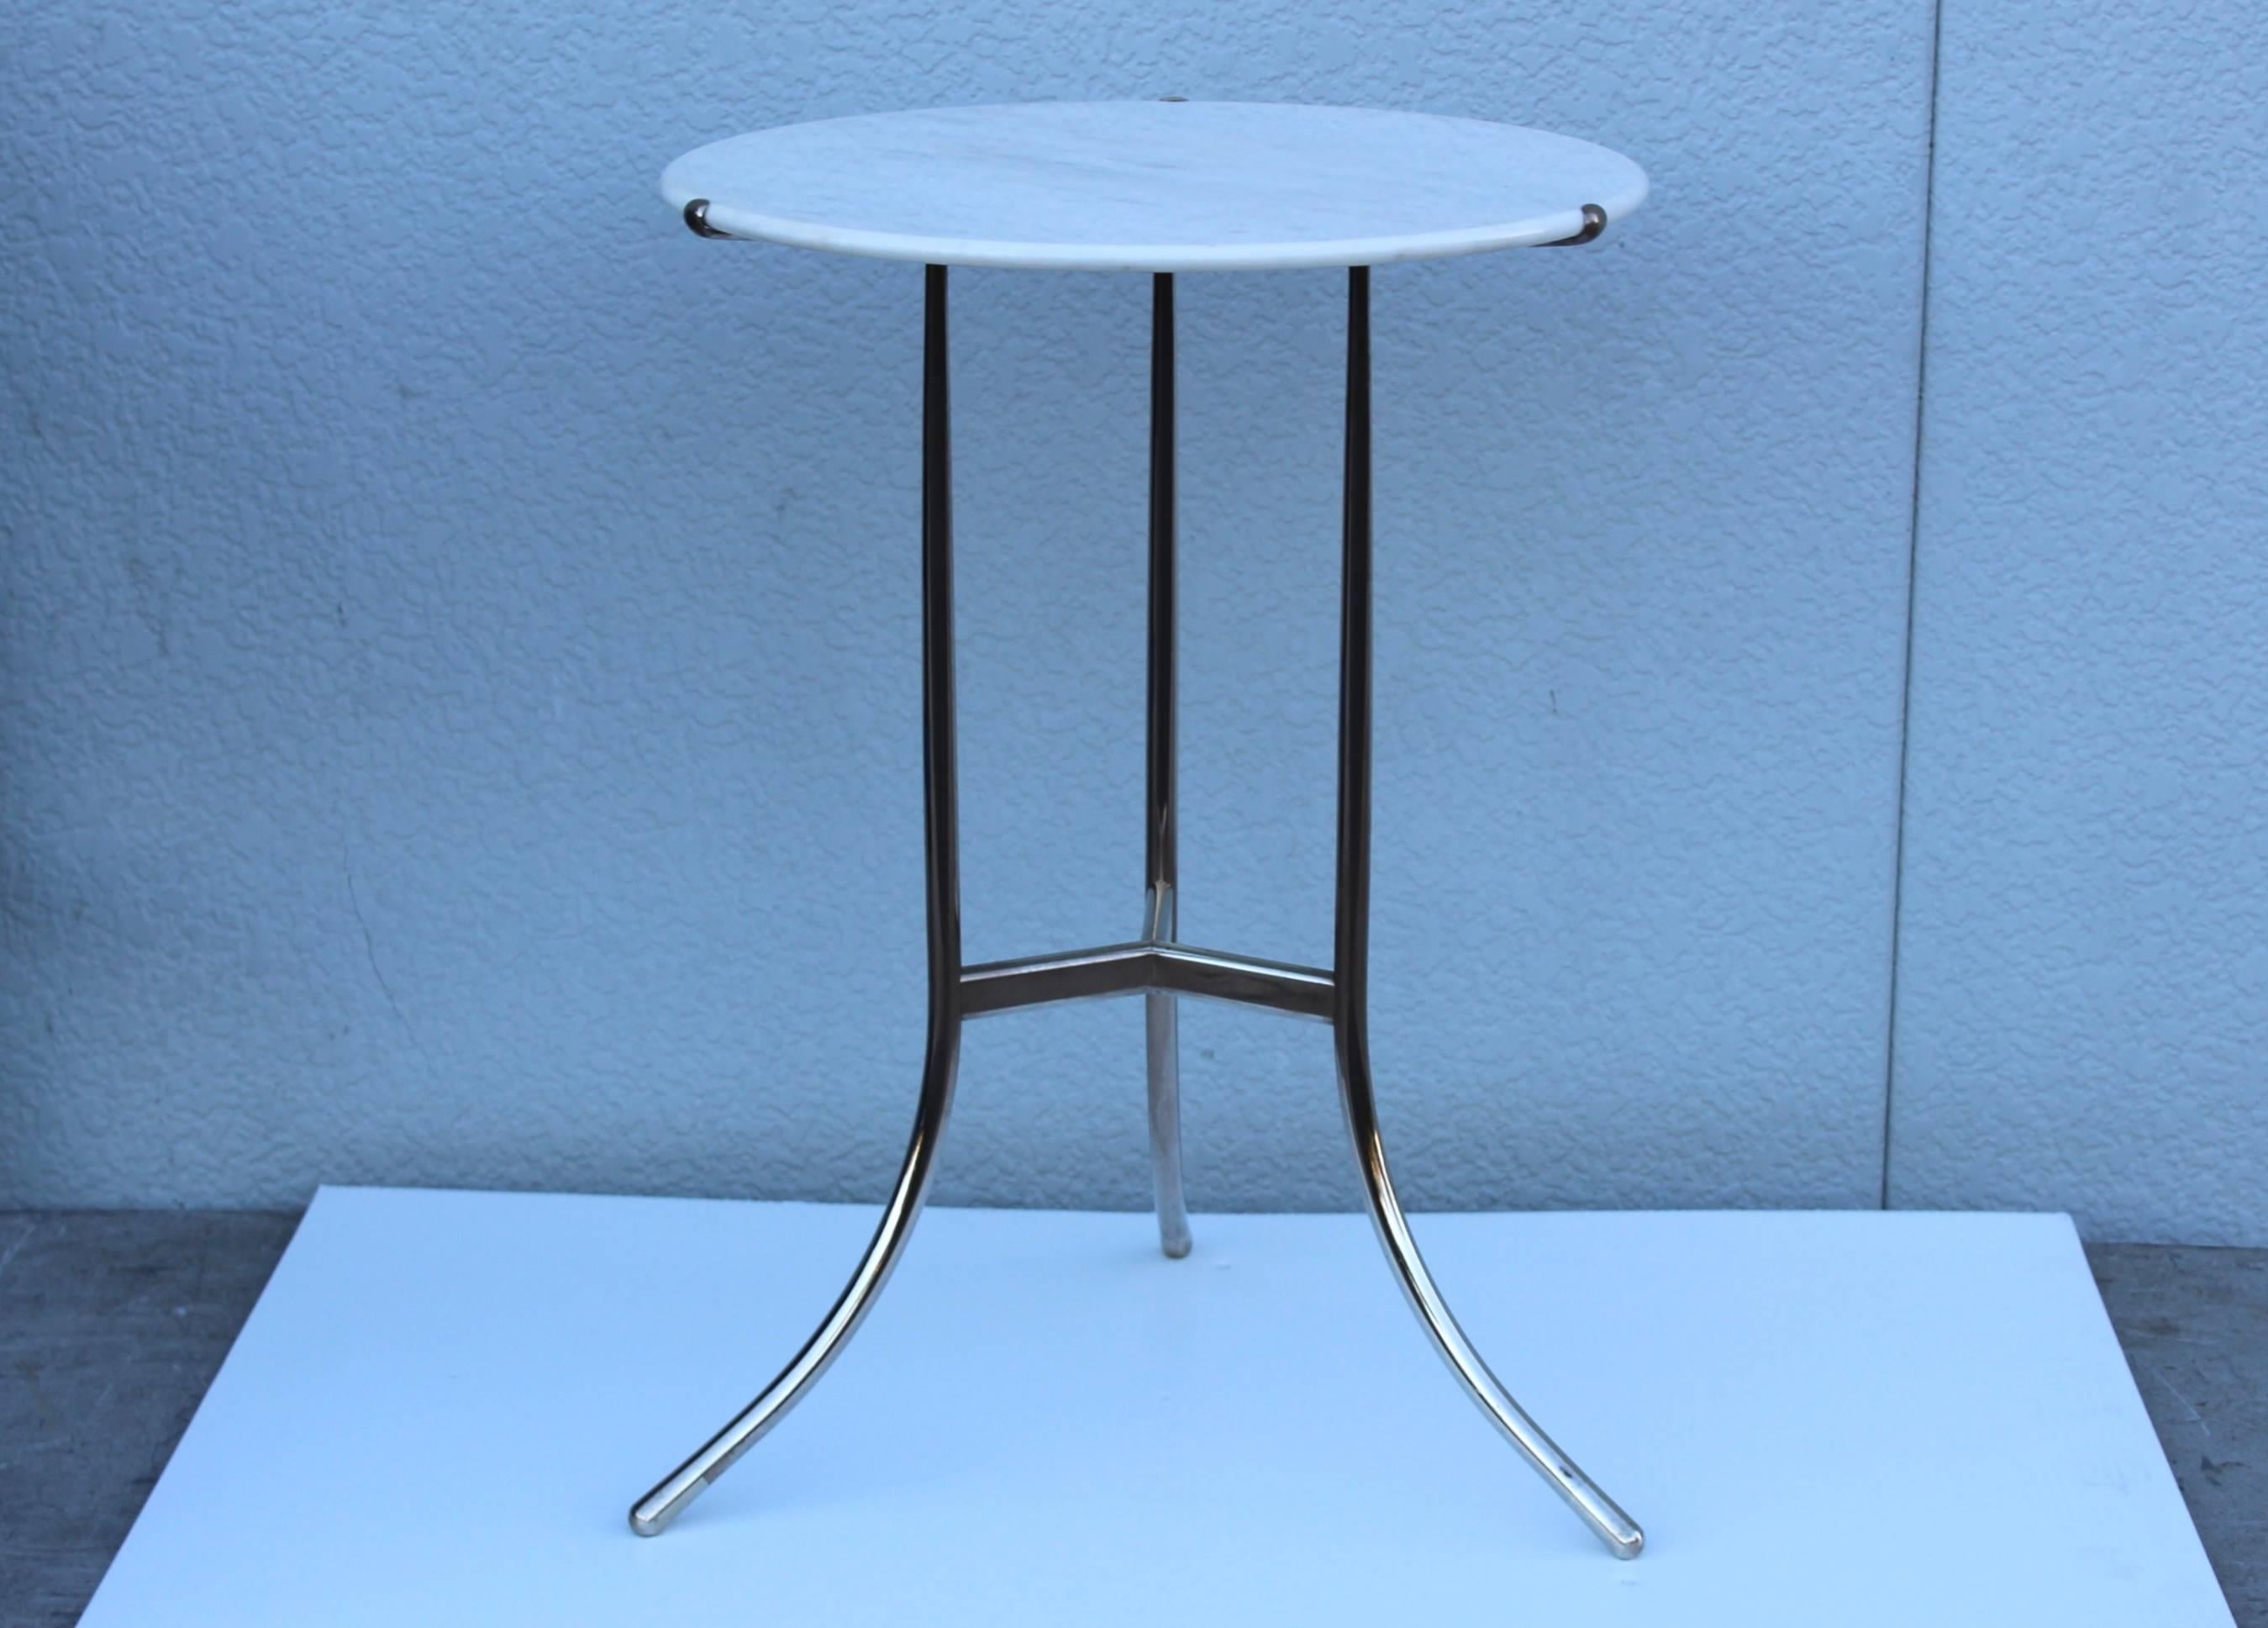 1970s Cedric Hartman side table with Carrara marble top and nickel-plated base.